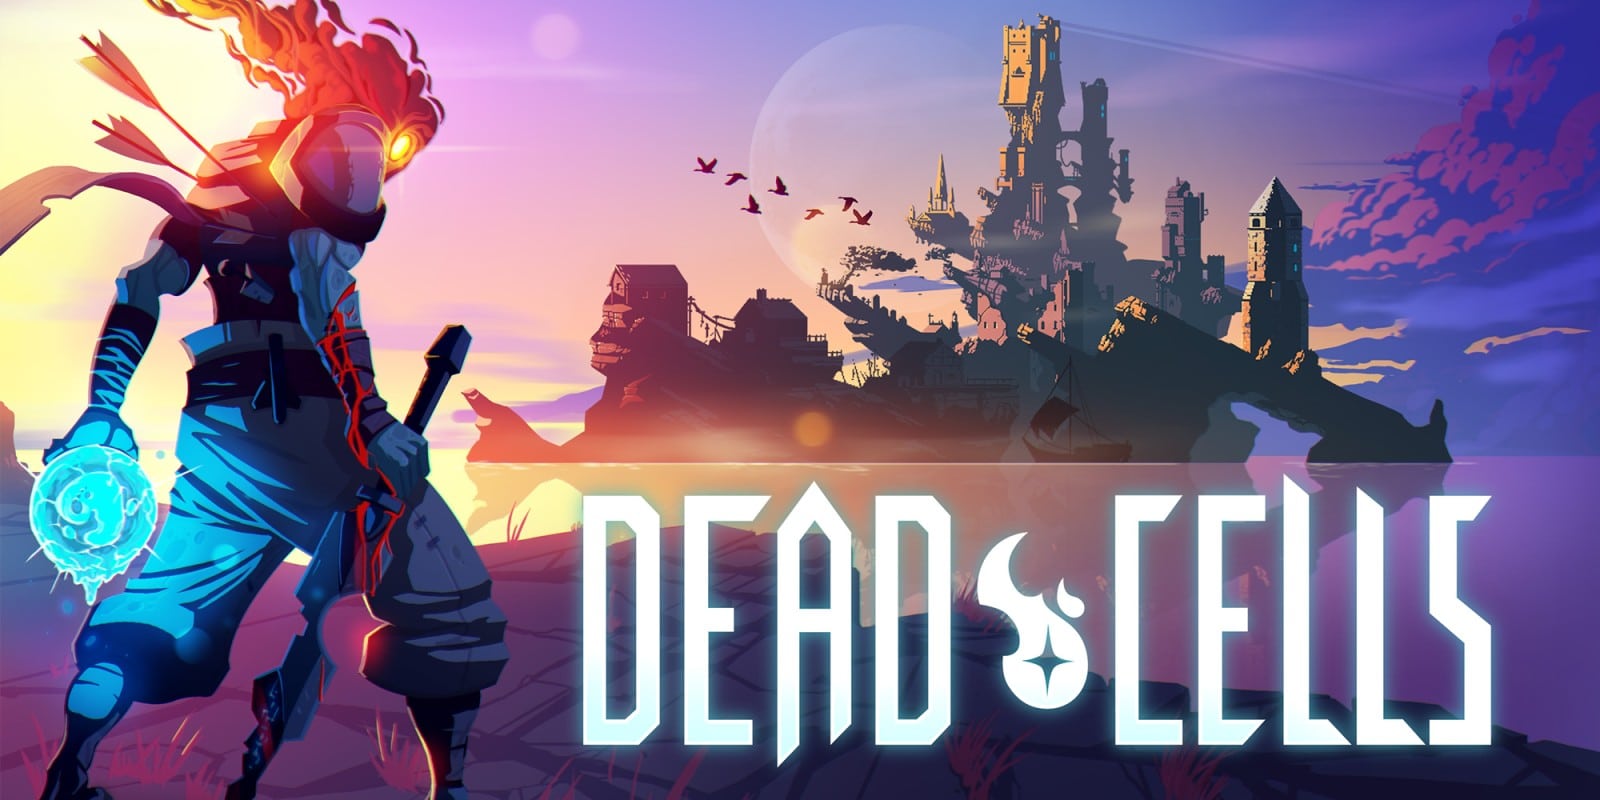 Dead cells haseo 2